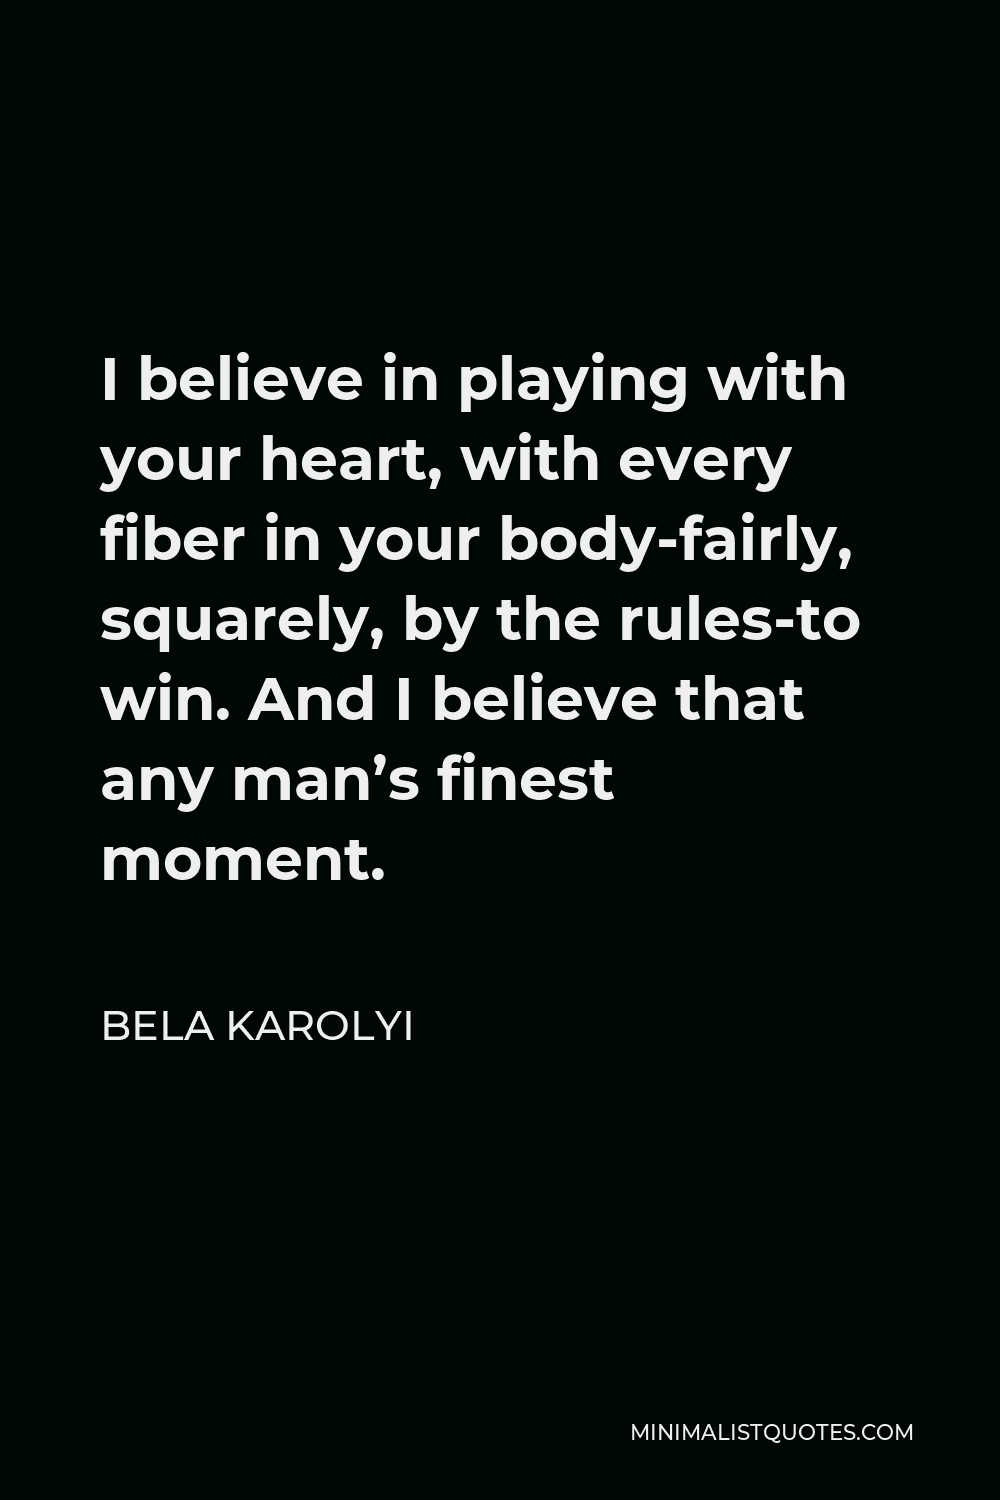 Bela Karolyi Quote - I believe in playing with your heart, with every fiber in your body-fairly, squarely, by the rules-to win. And I believe that any man’s finest moment.